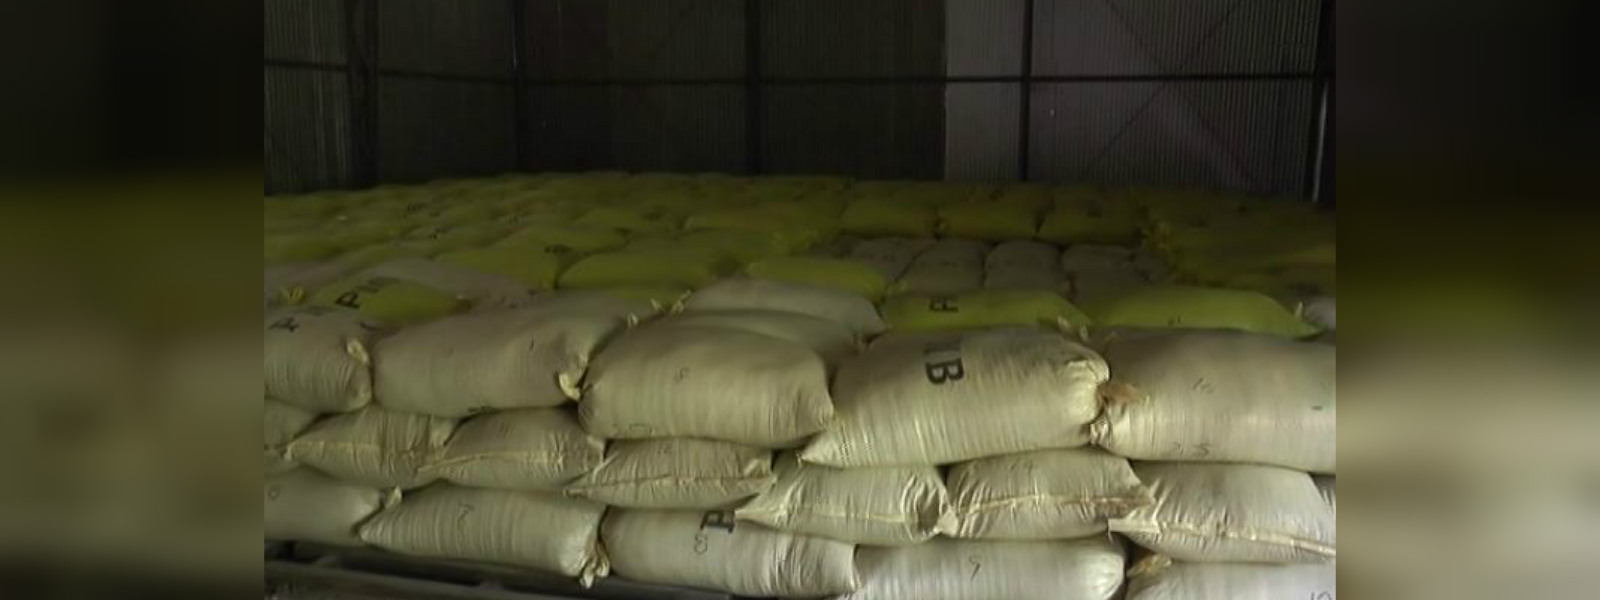 Rice mills inactive due to harvest shortage